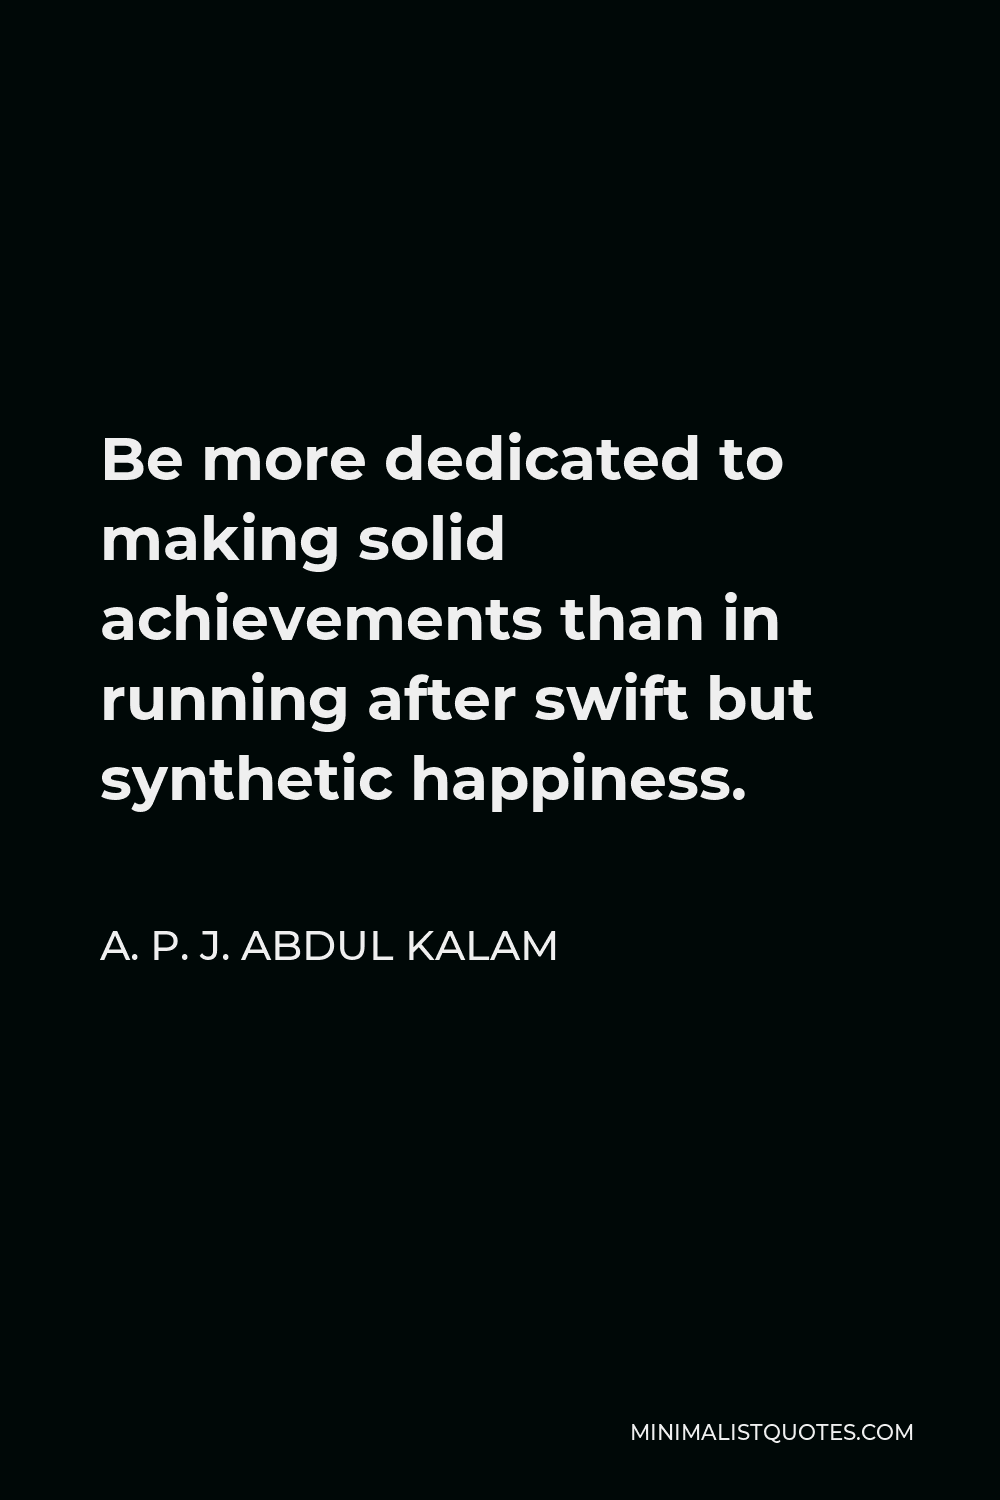 A. P. J. Abdul Kalam Quote - Be more dedicated to making solid achievements than in running after swift but synthetic happiness.